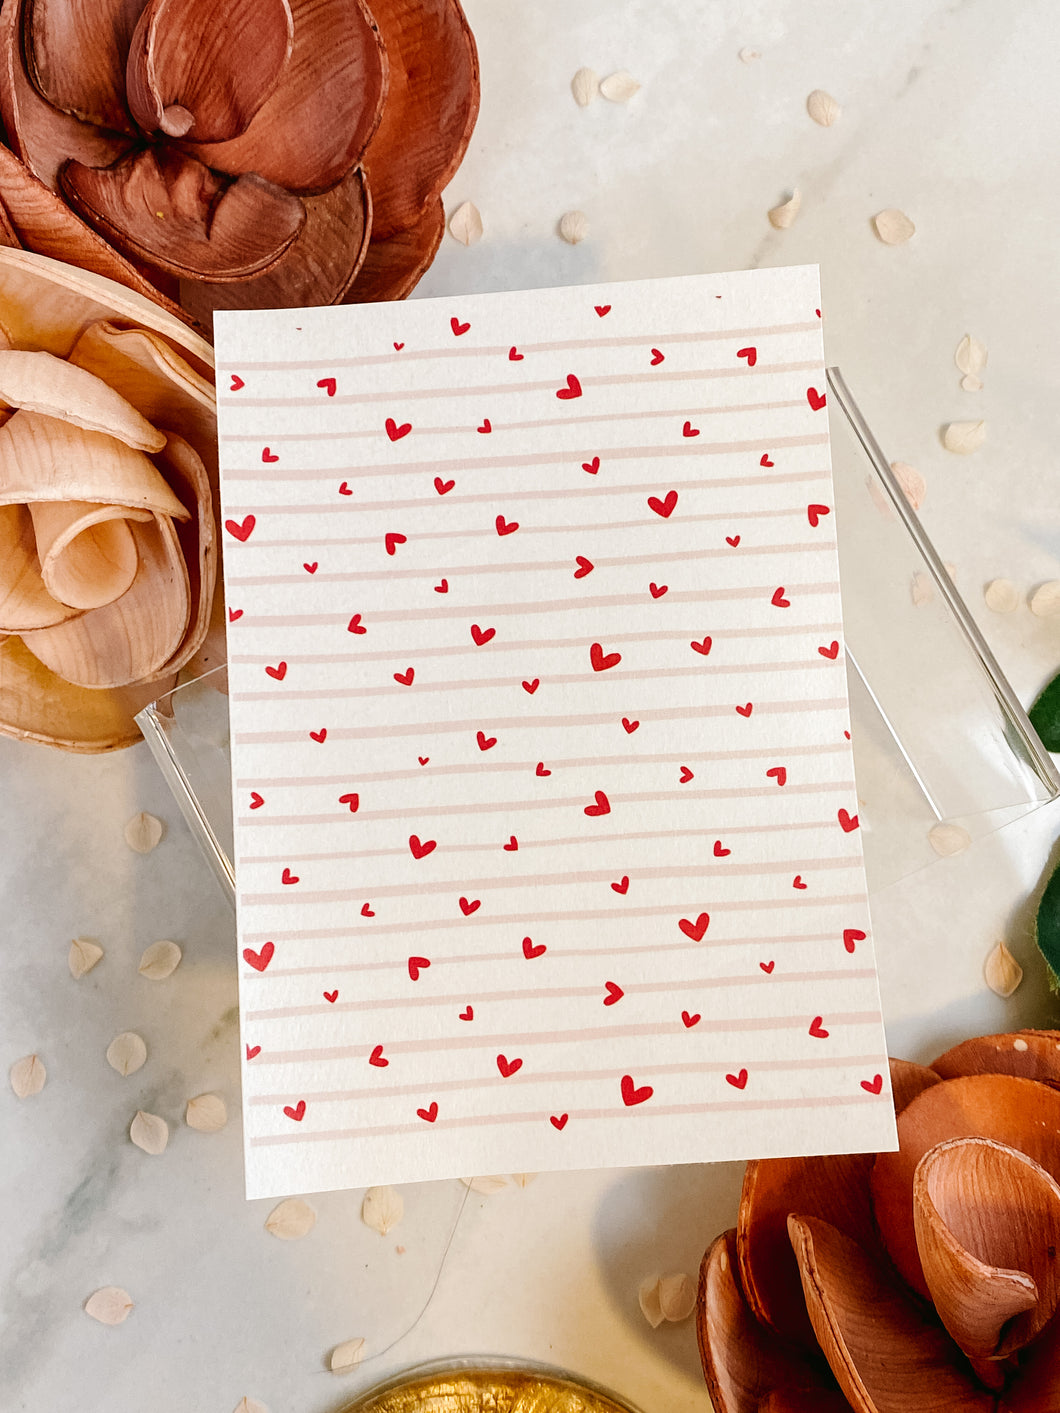 Transfer Paper 045 The Notebook Love | Valentine’s Image Water Transfer